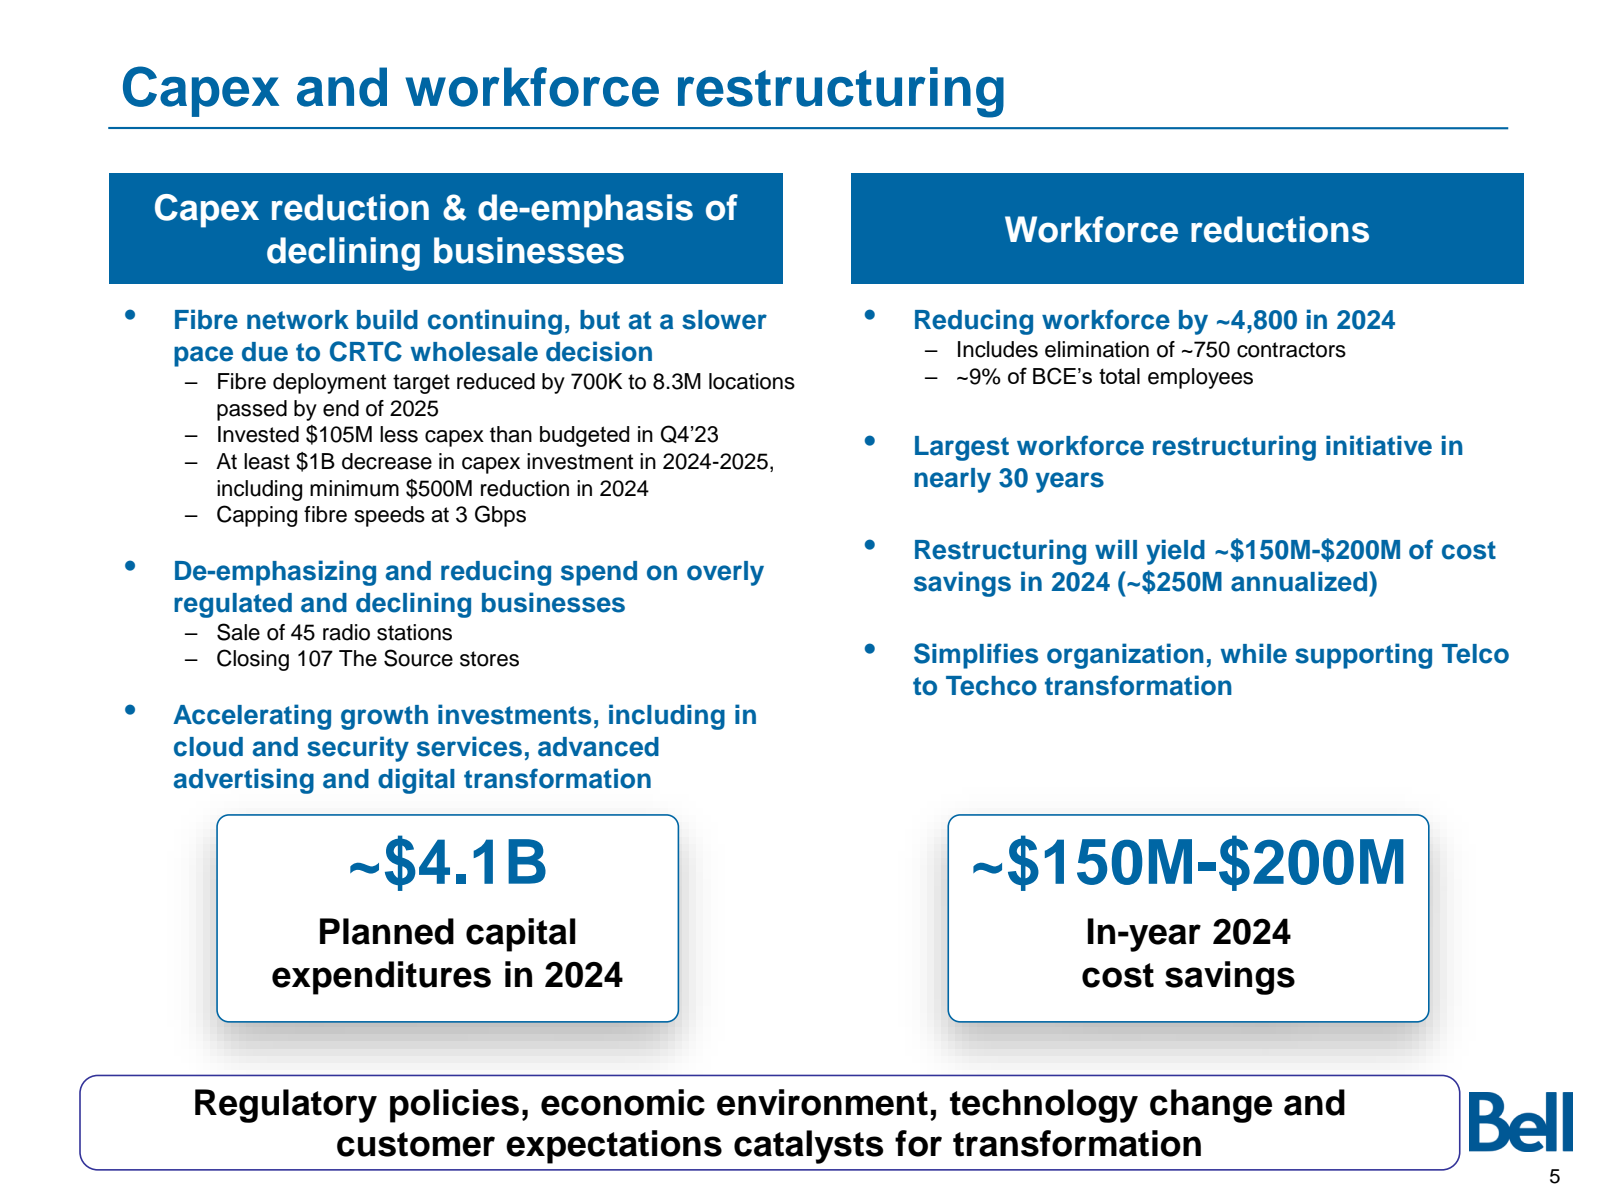 Capex and workforce 